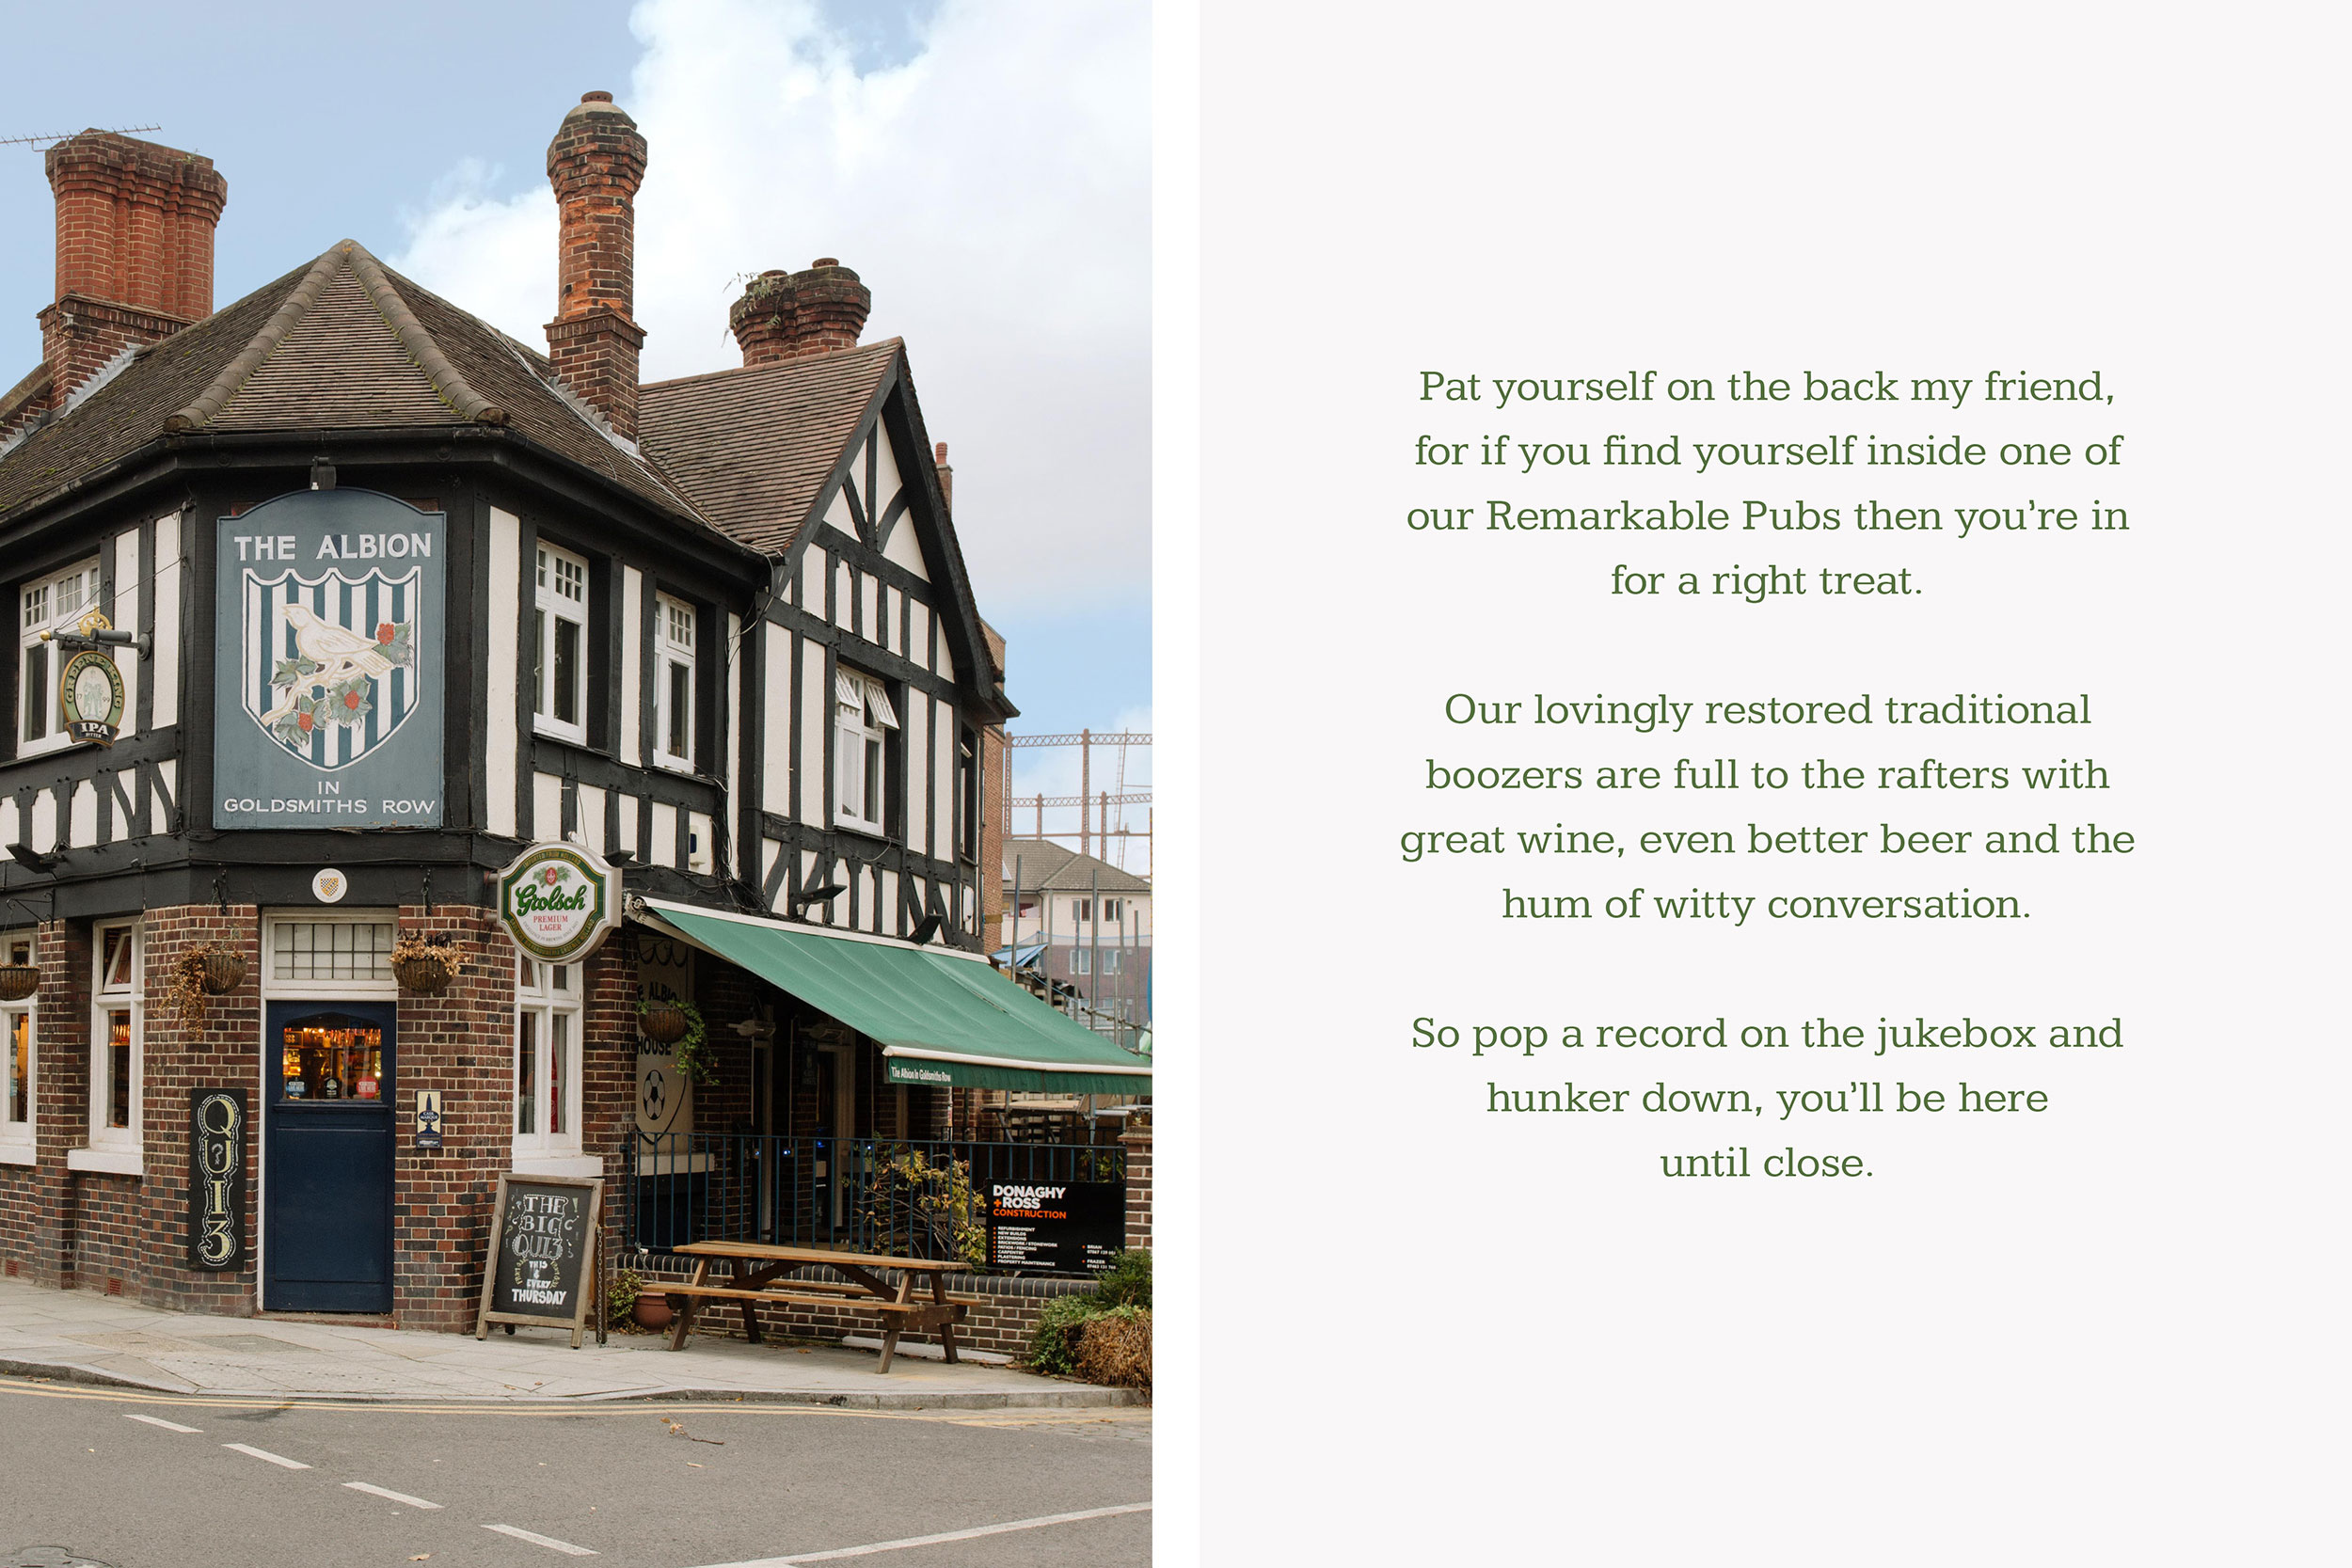 Shot of the exterior of a pub, next to text about Remarkable Pubs. Graphic design produced by Barefaced Studios, design agency based in Islington, North London.